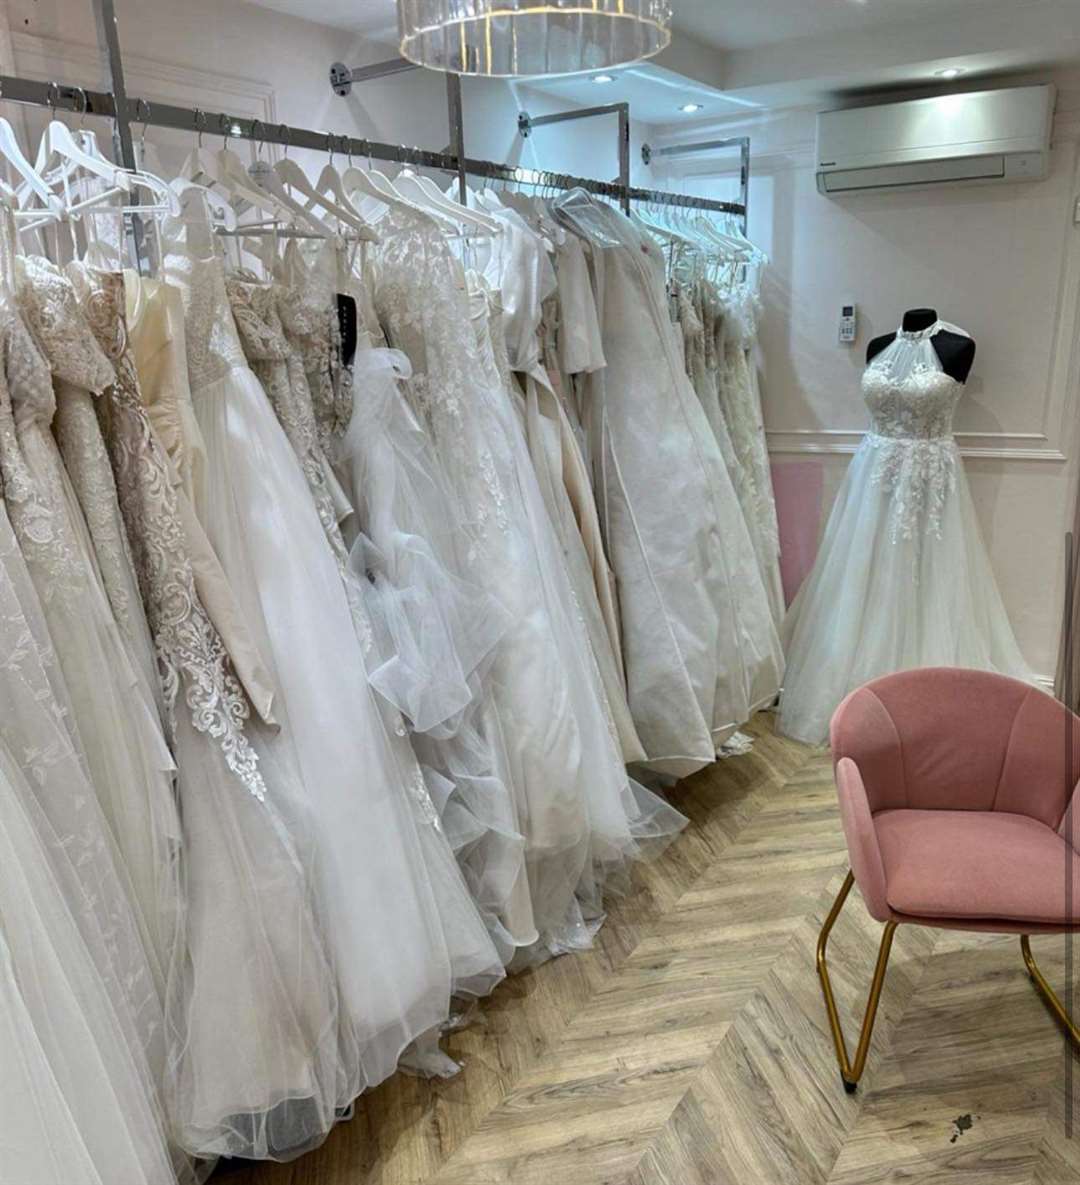 The 56-year-old sells a range of wedding gowns, bridesmaid outfits and prom dresses. Picture: Linda Quayle